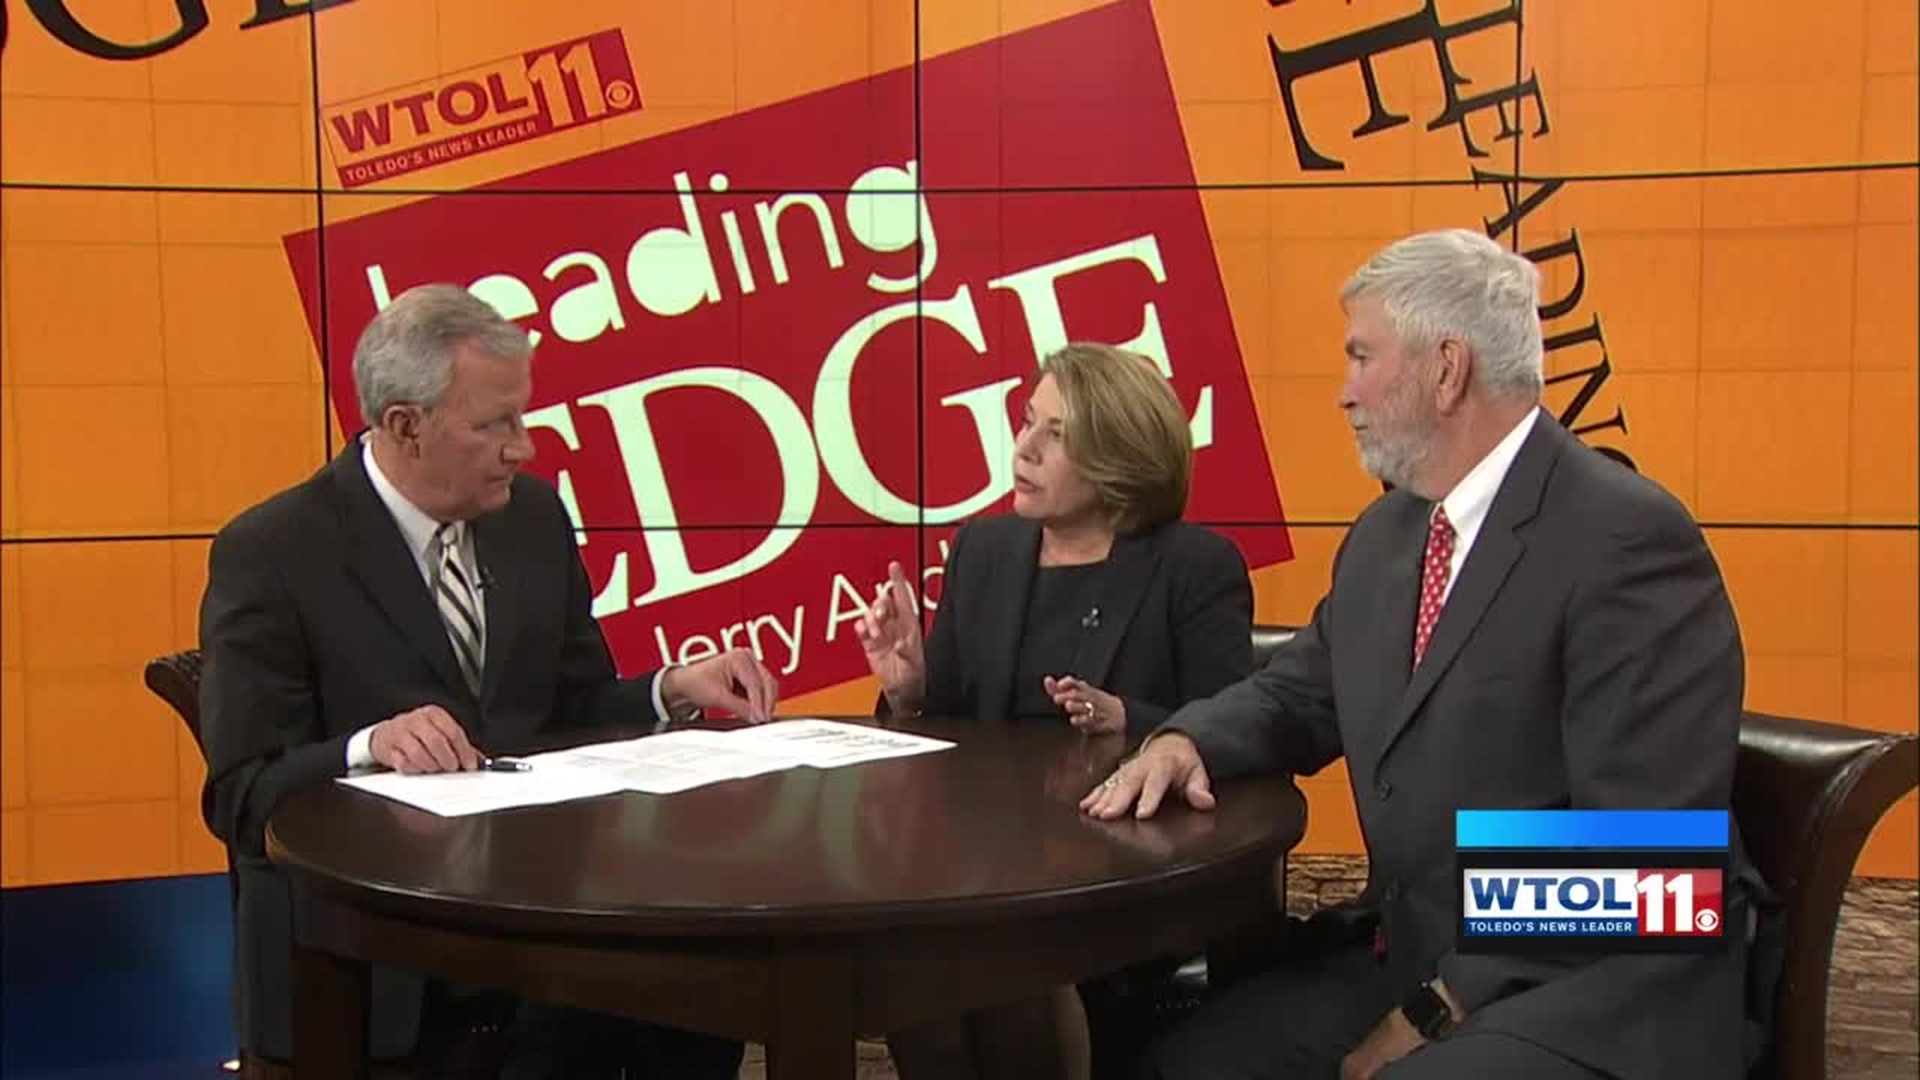 Oct 28: Leading Edge with Jerry Anderson - Part 1